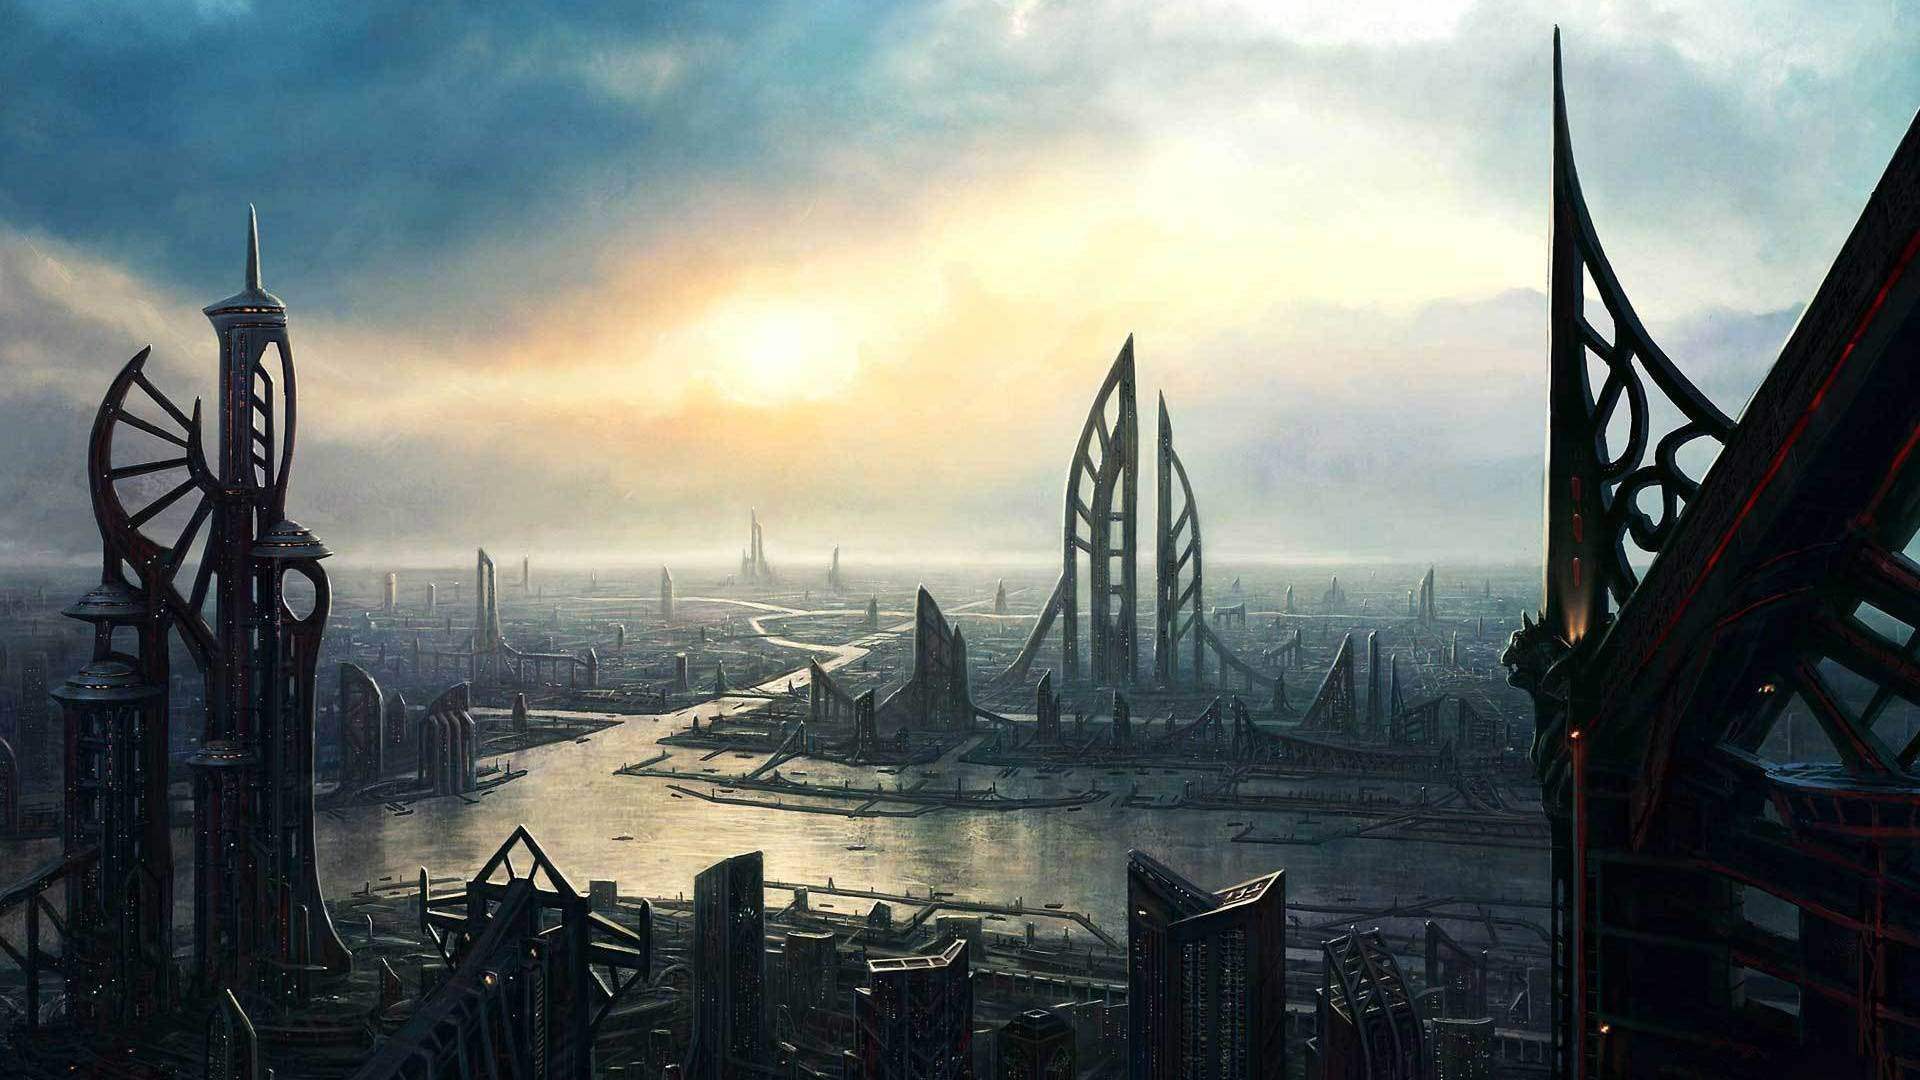 Fantastical City Art With Towers Wallpaper